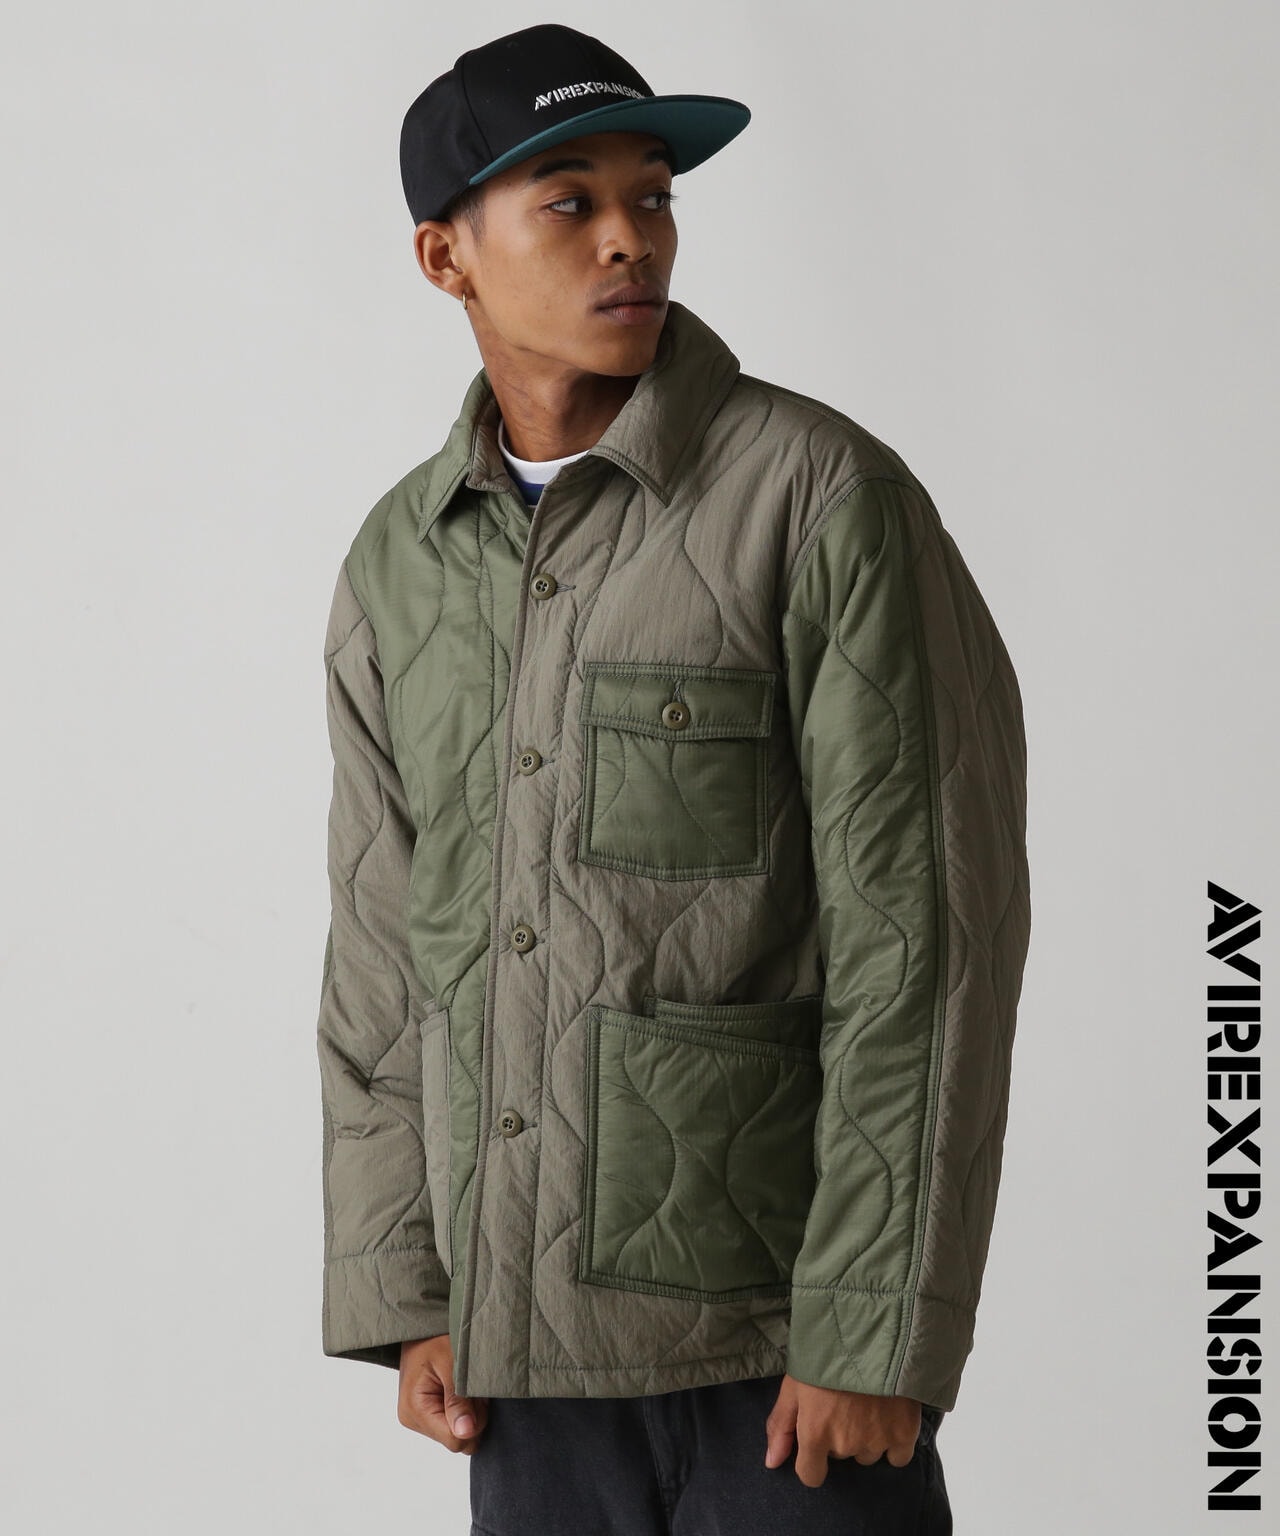 AVIREX × EXPANSION》2TONE QUILTE COVER JACKET | AVIREX 